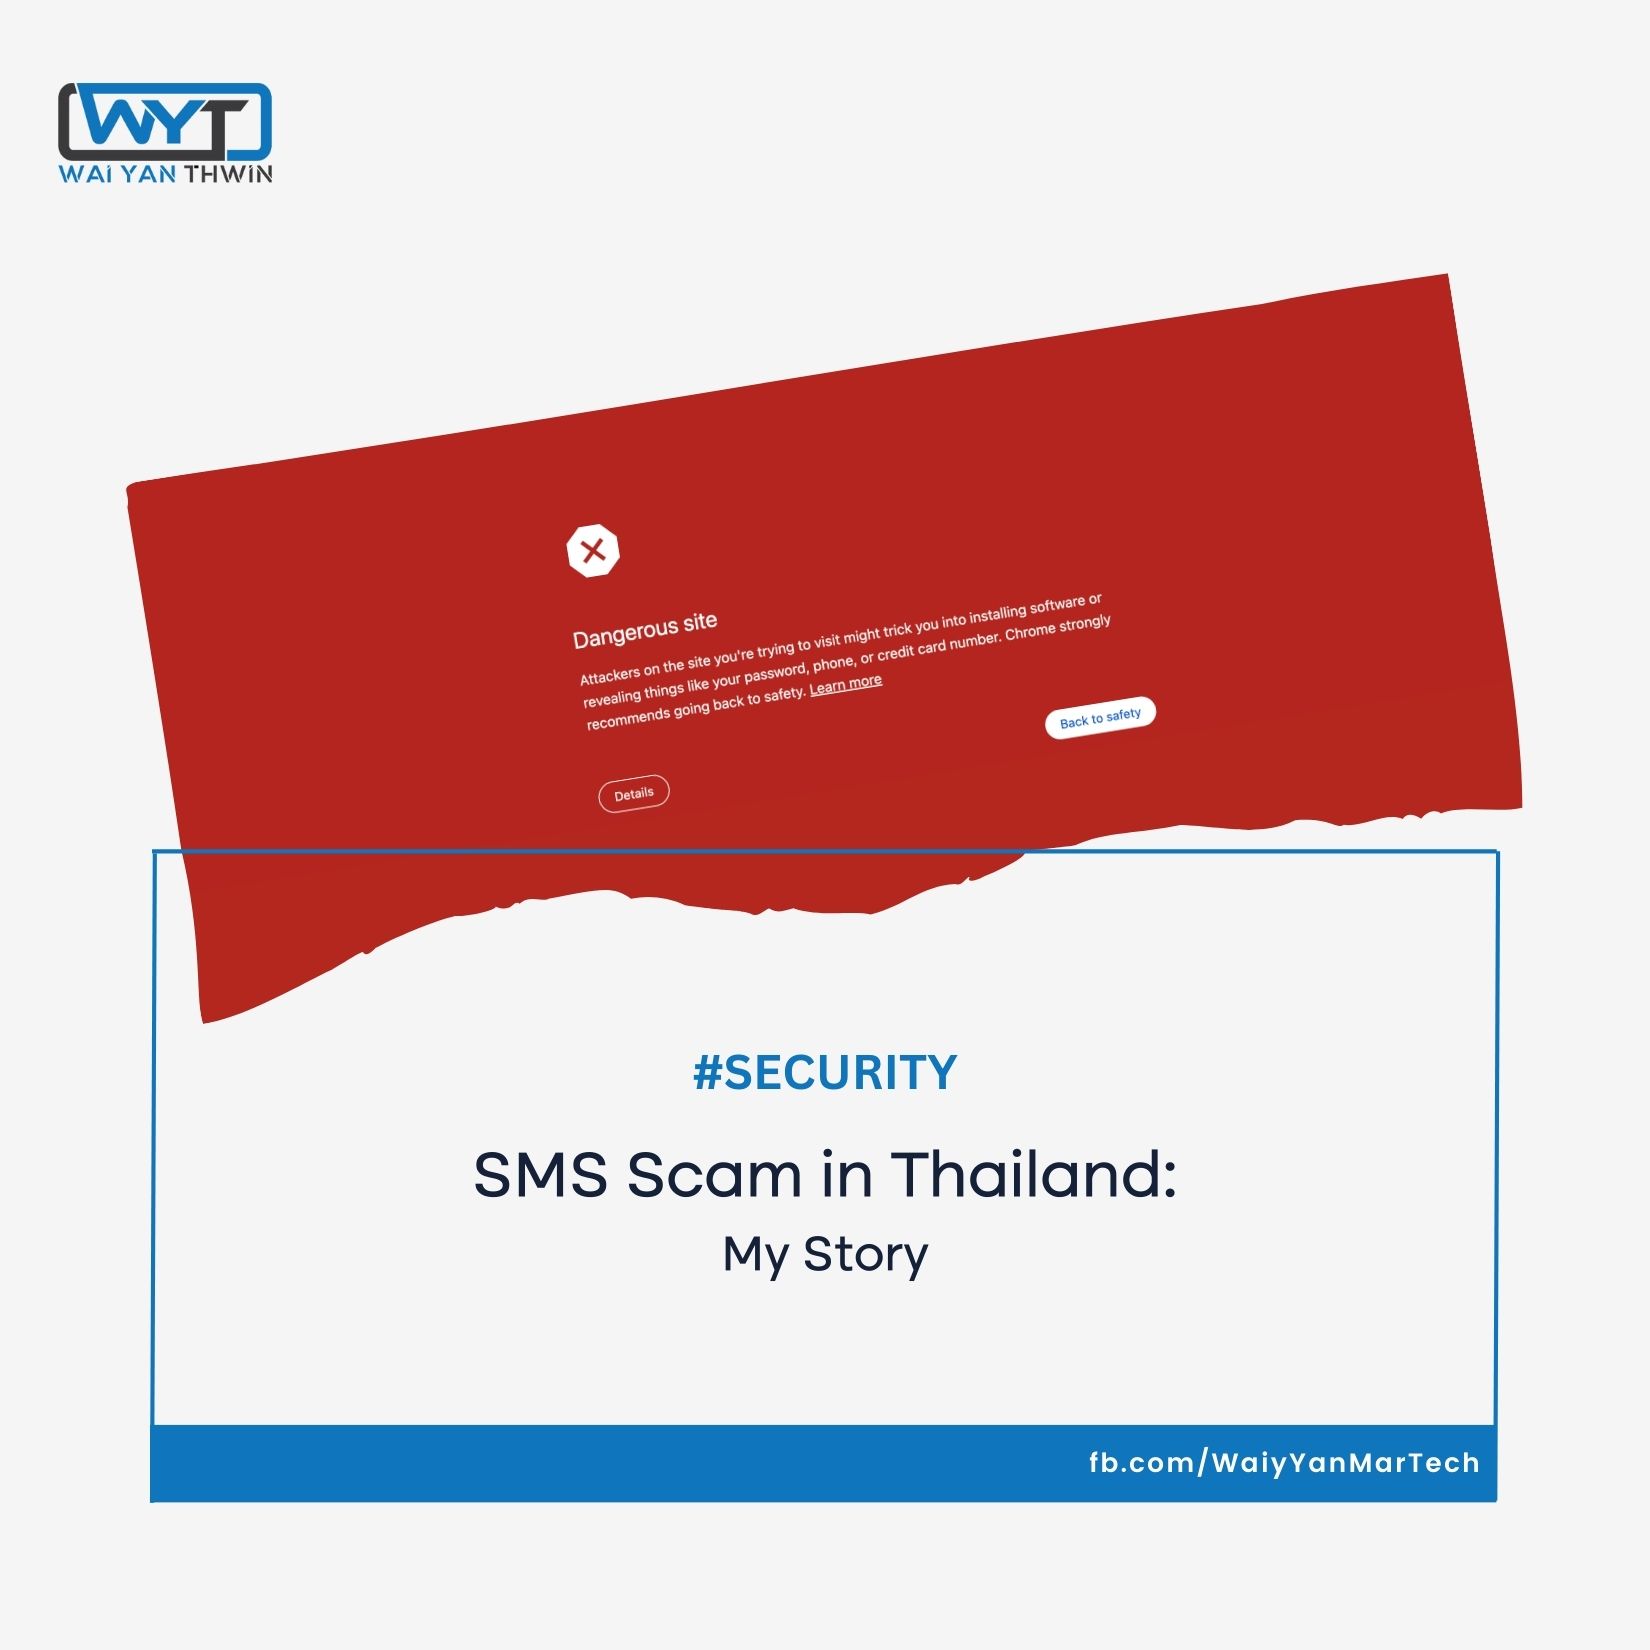 SMS Scam in Thailand: My Story